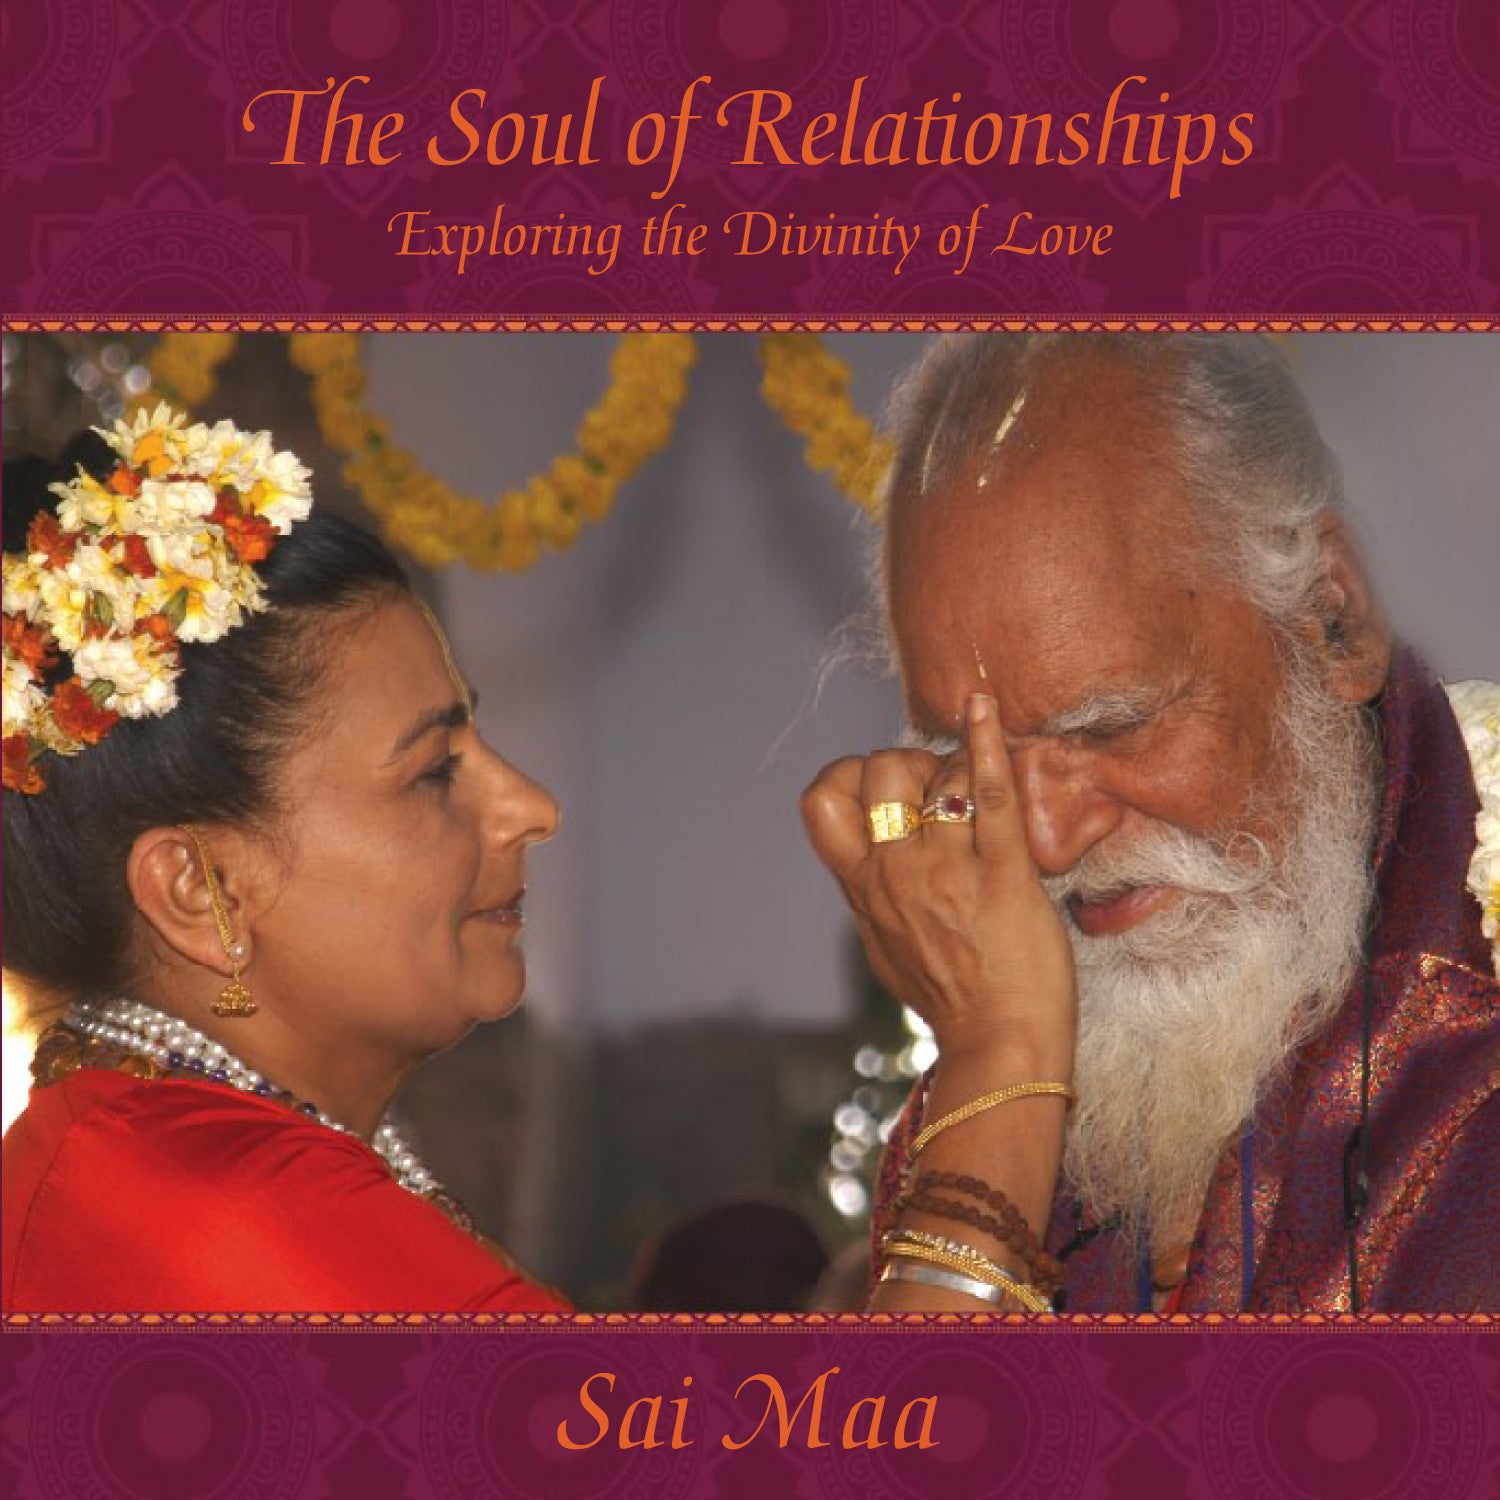 The Soul of Relationships: Exploring the Divinity of Love